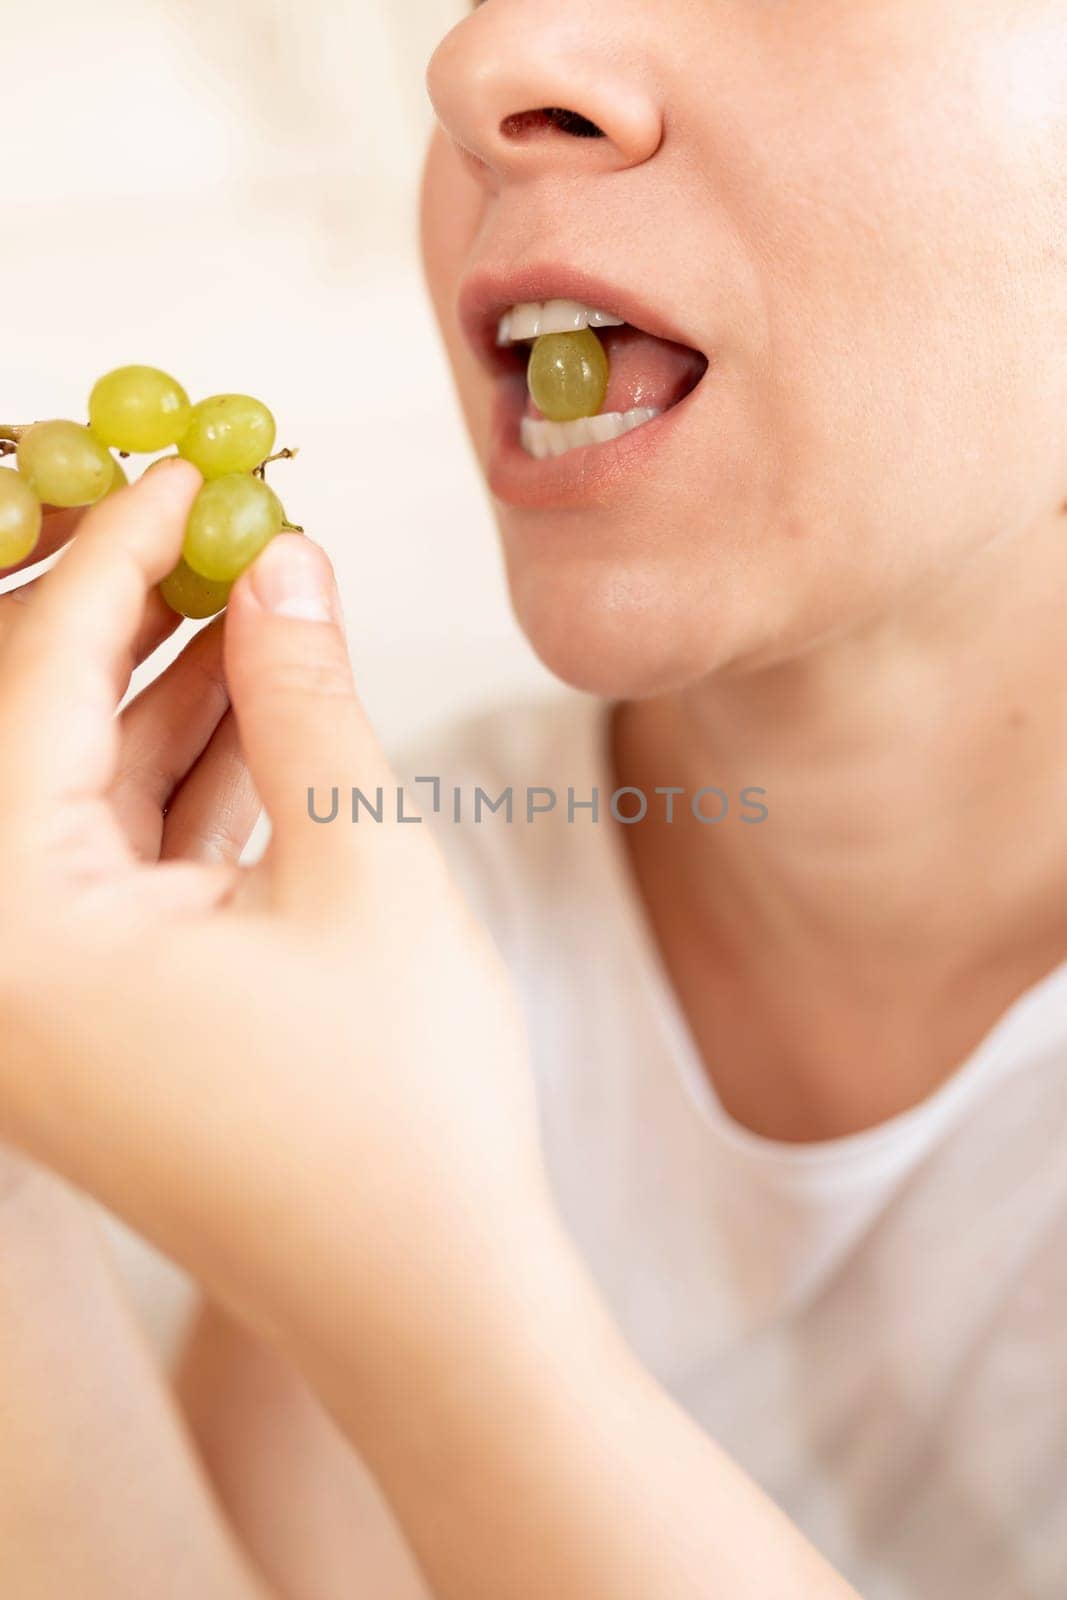 young woman overeats on fruit while dieting.